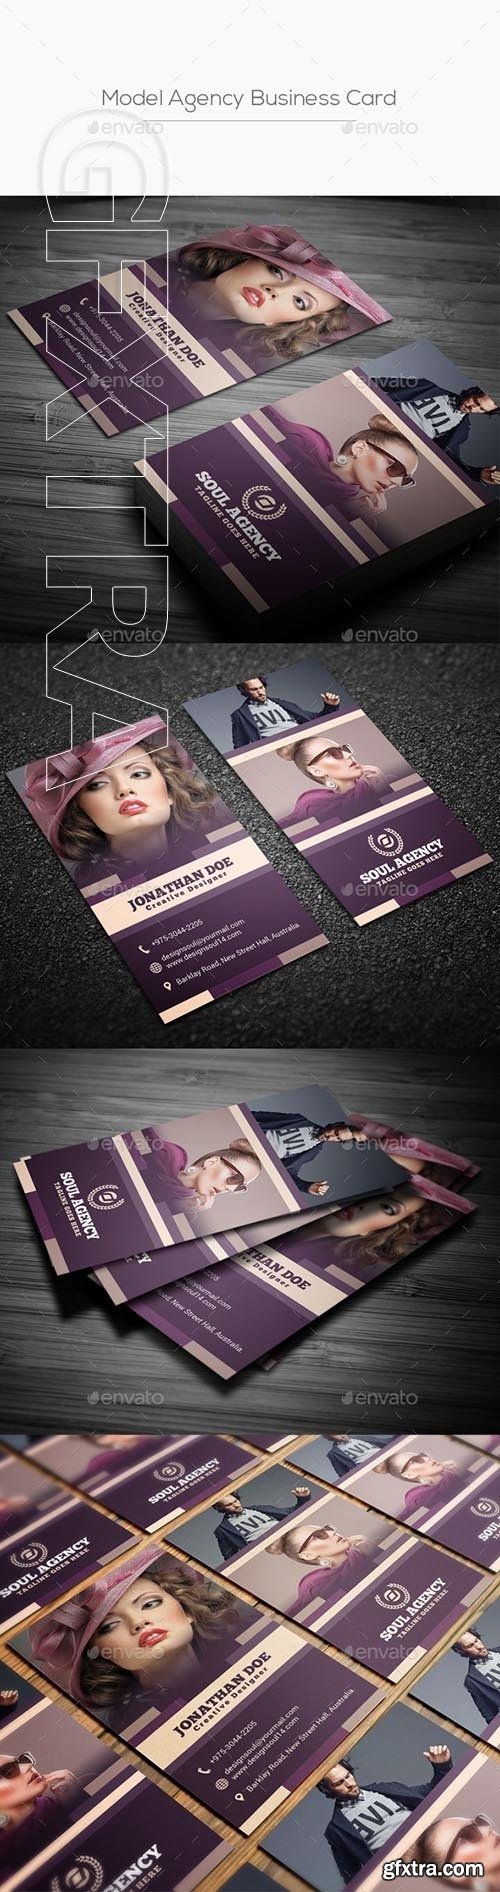 GraphicRiver - Model Agency Business Card 21895014